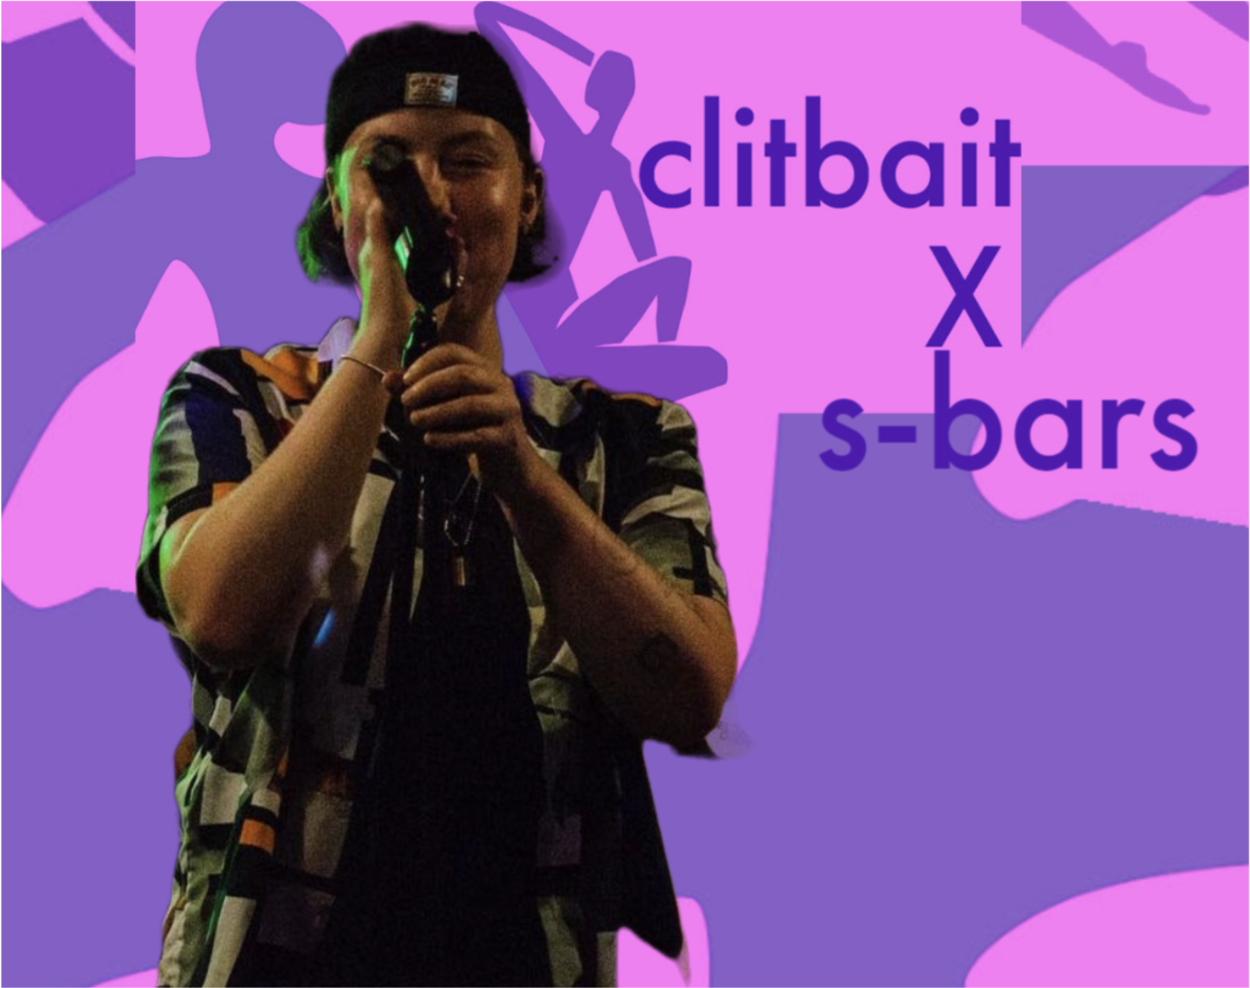 Text reads: "clitbait x s-bars" with an image of s-bars performing